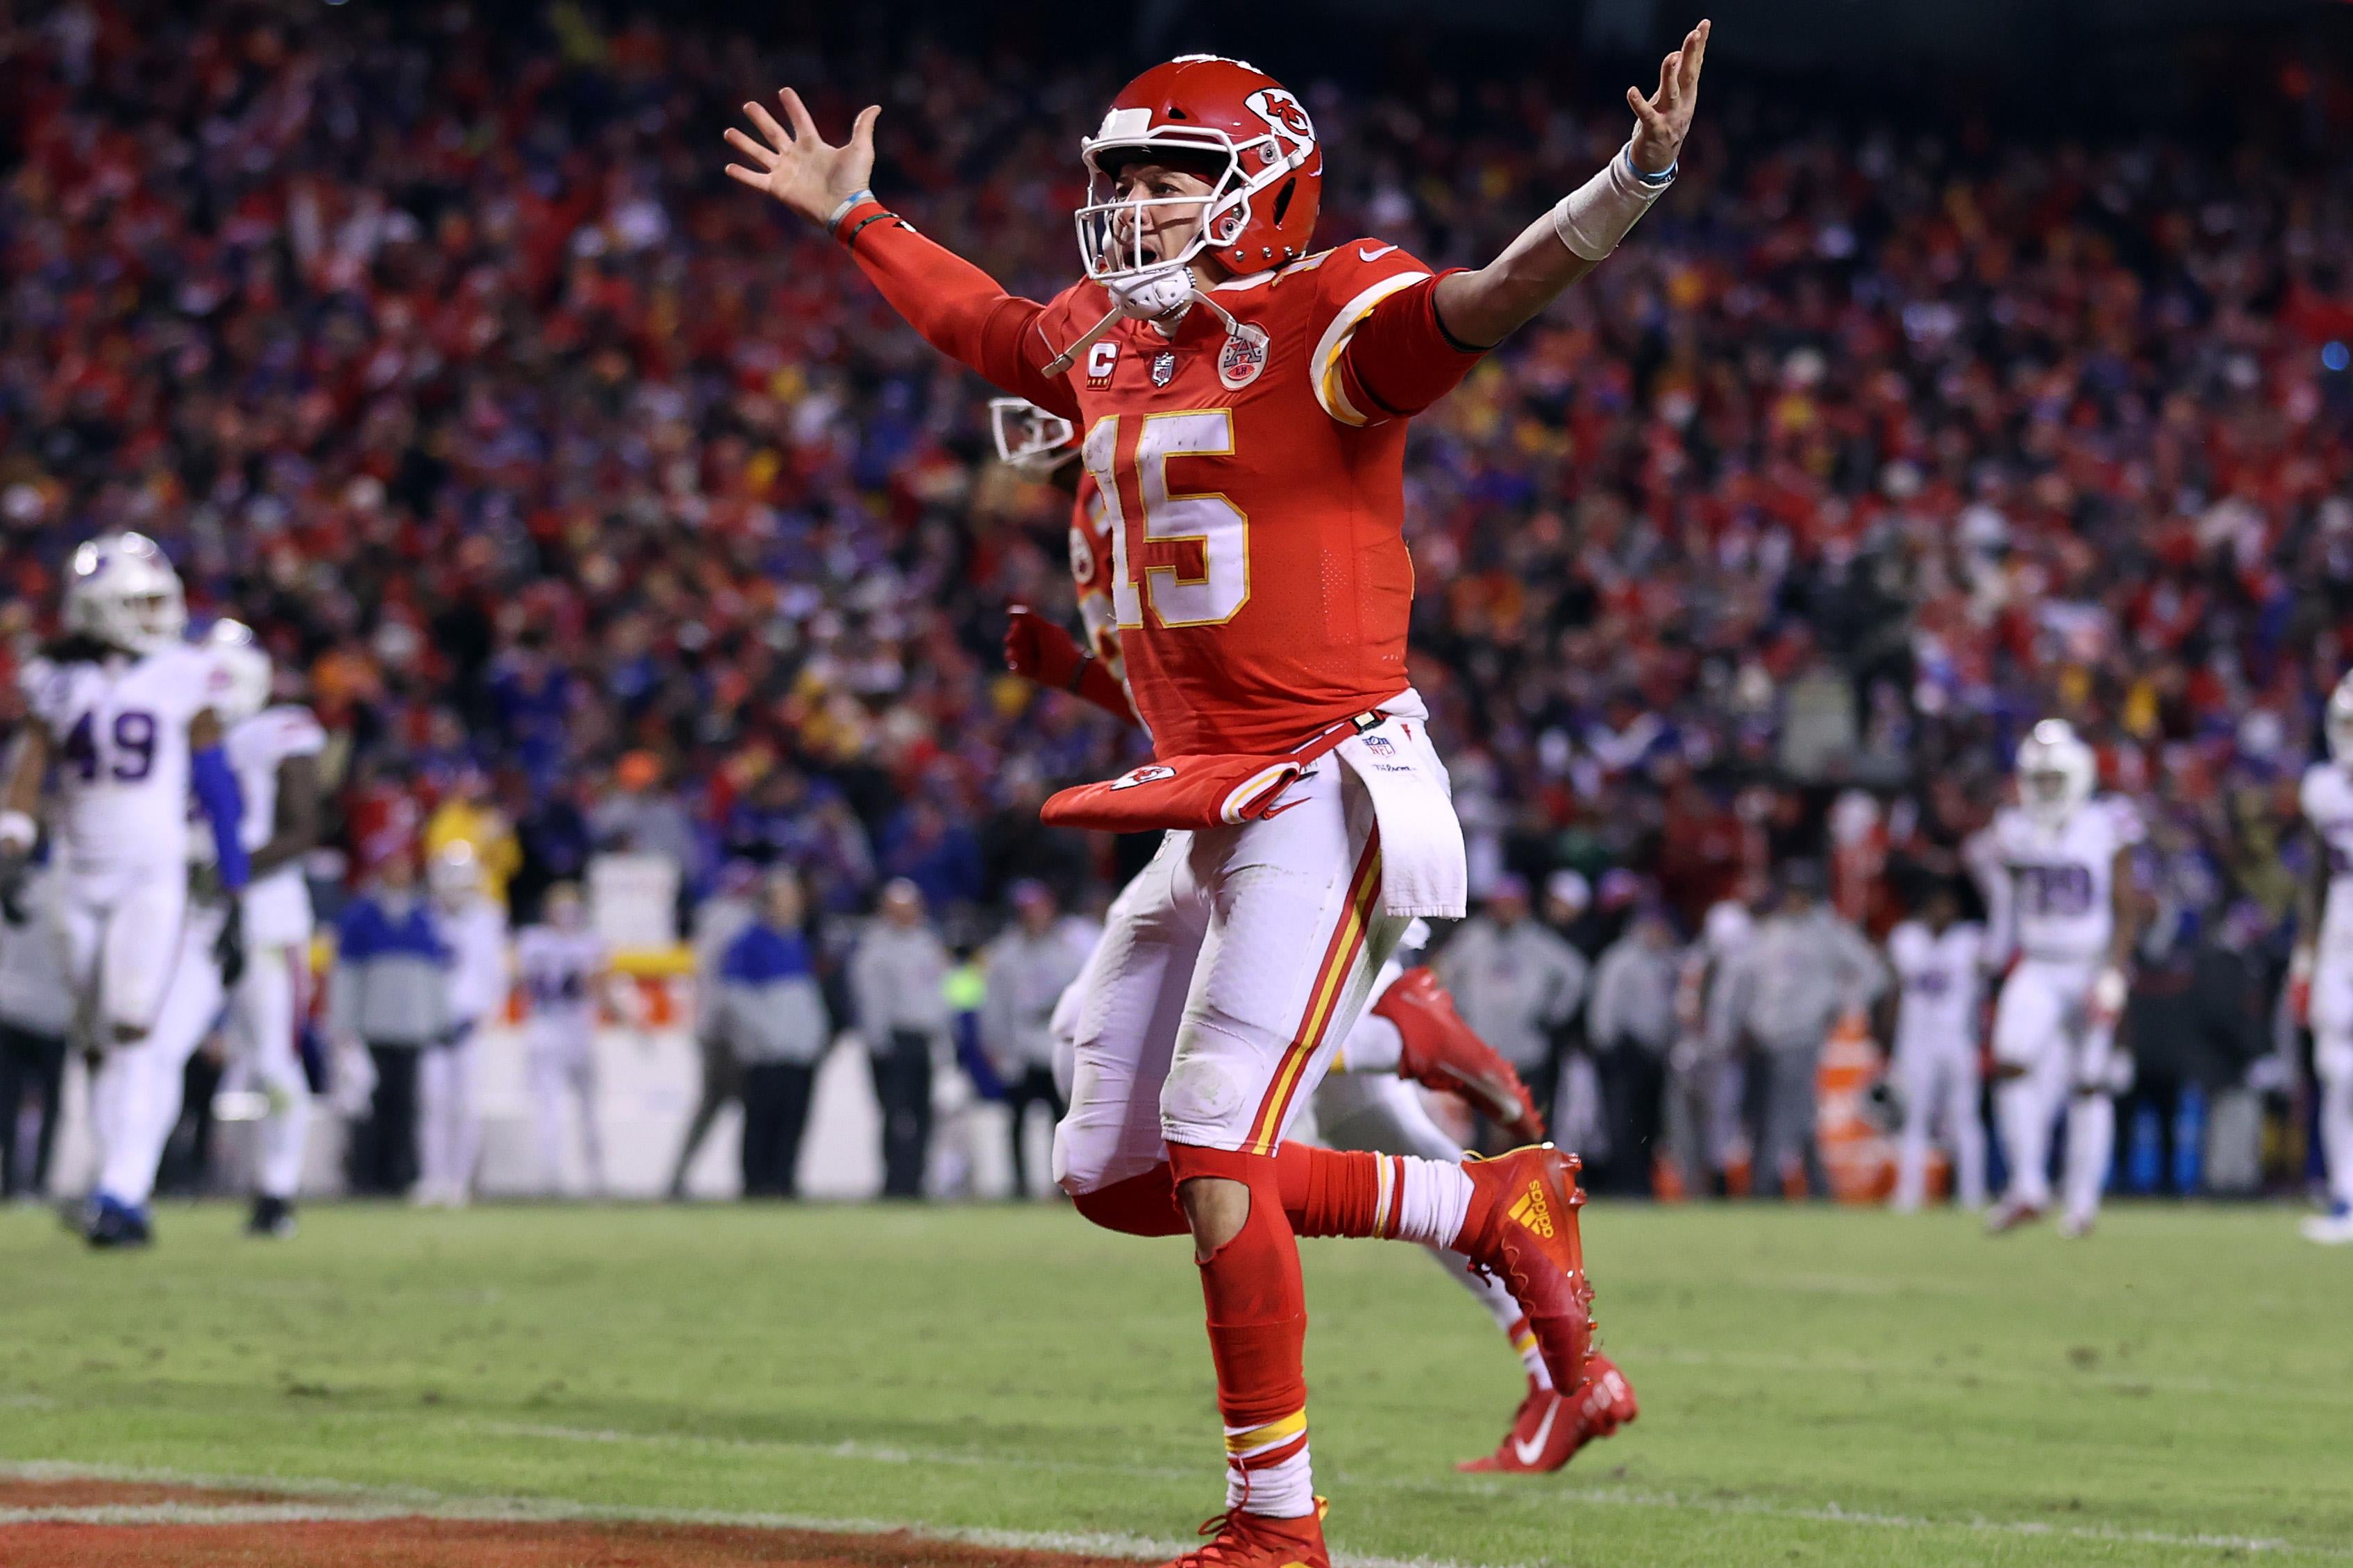 Patrick Mahomes celebrates on the field with his arms outstretched.